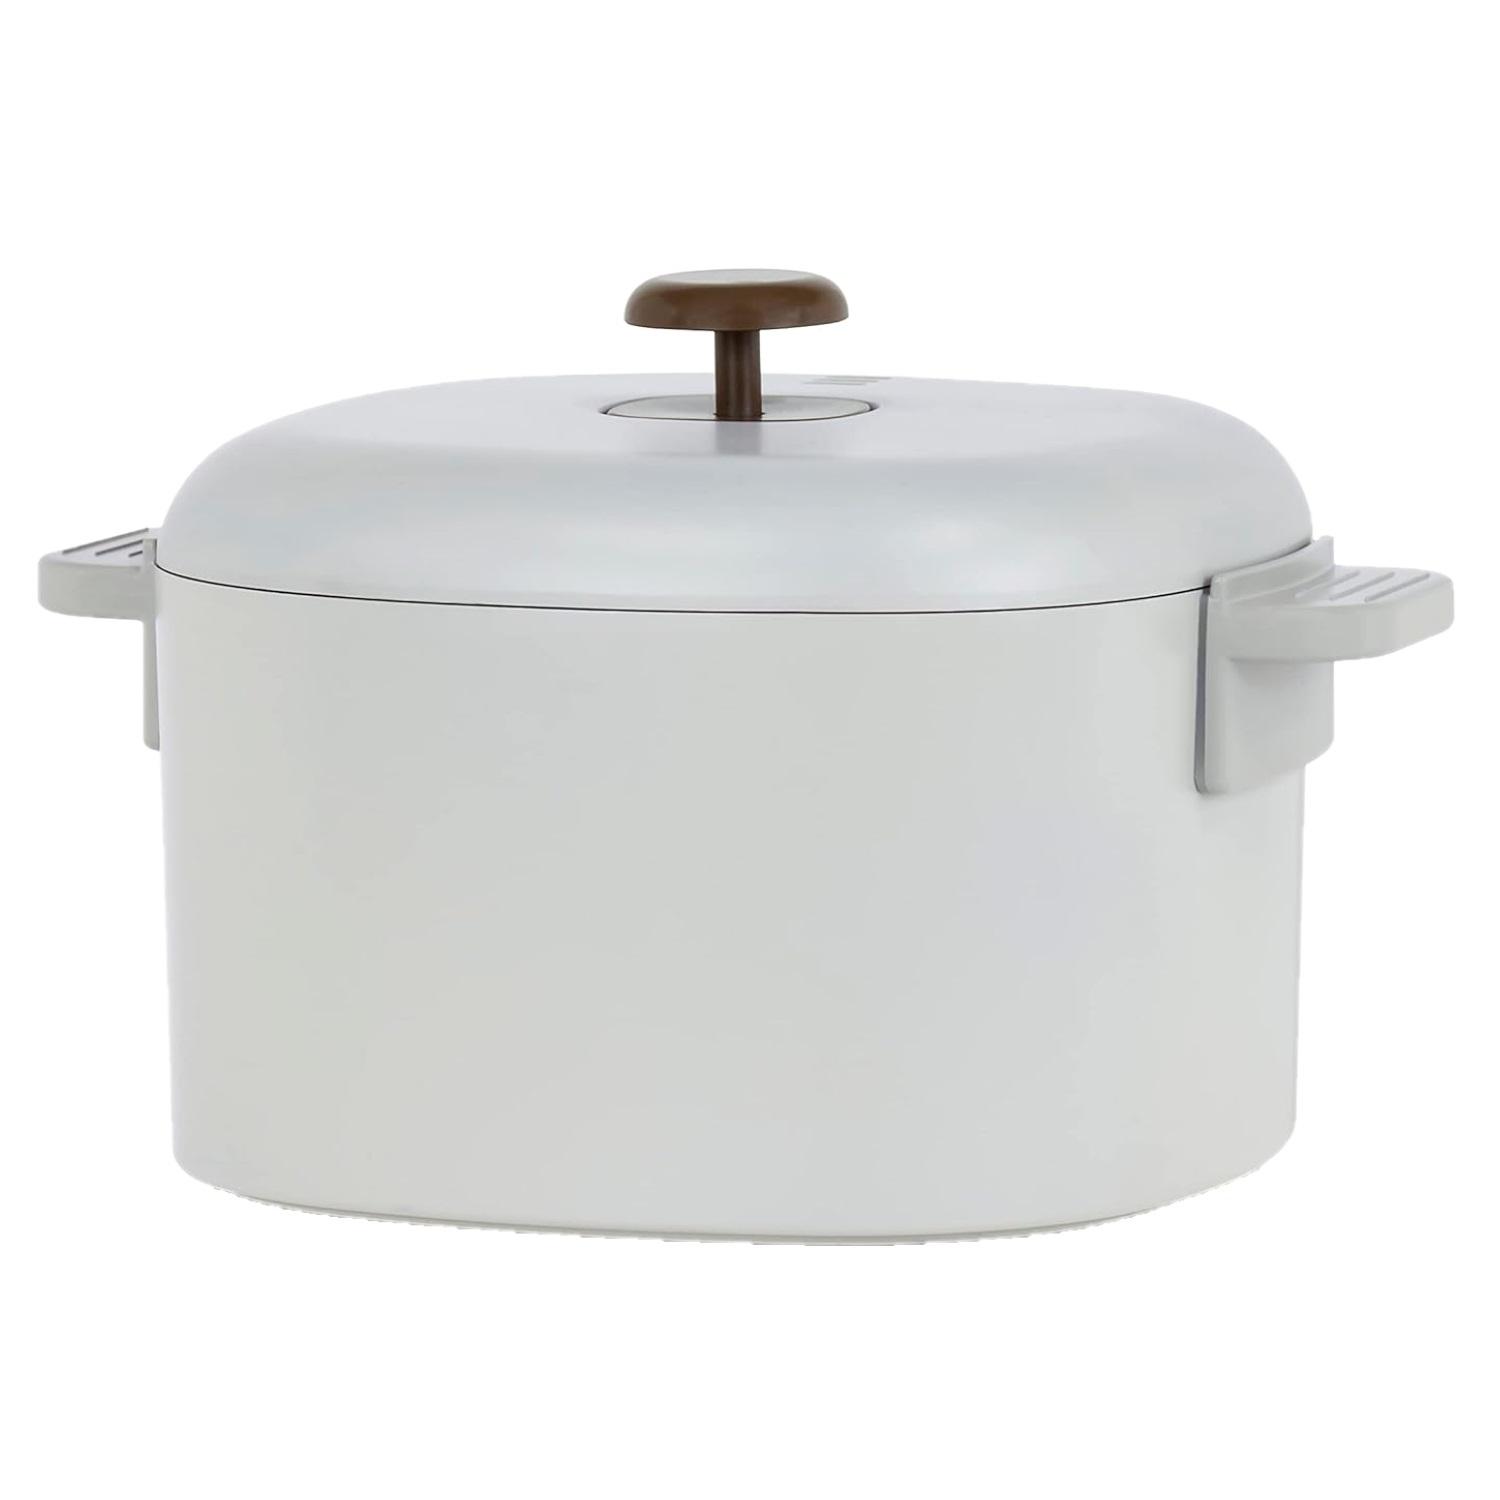 WanT  Kitchen&Home Appliances Nonstick Cooking Pot with Lid,Cookware,pan   Steam, Bake, Braise, Roast   PTFE and PFOA-Free   Toxin-Free, Easy to Clean  kitchen accessories